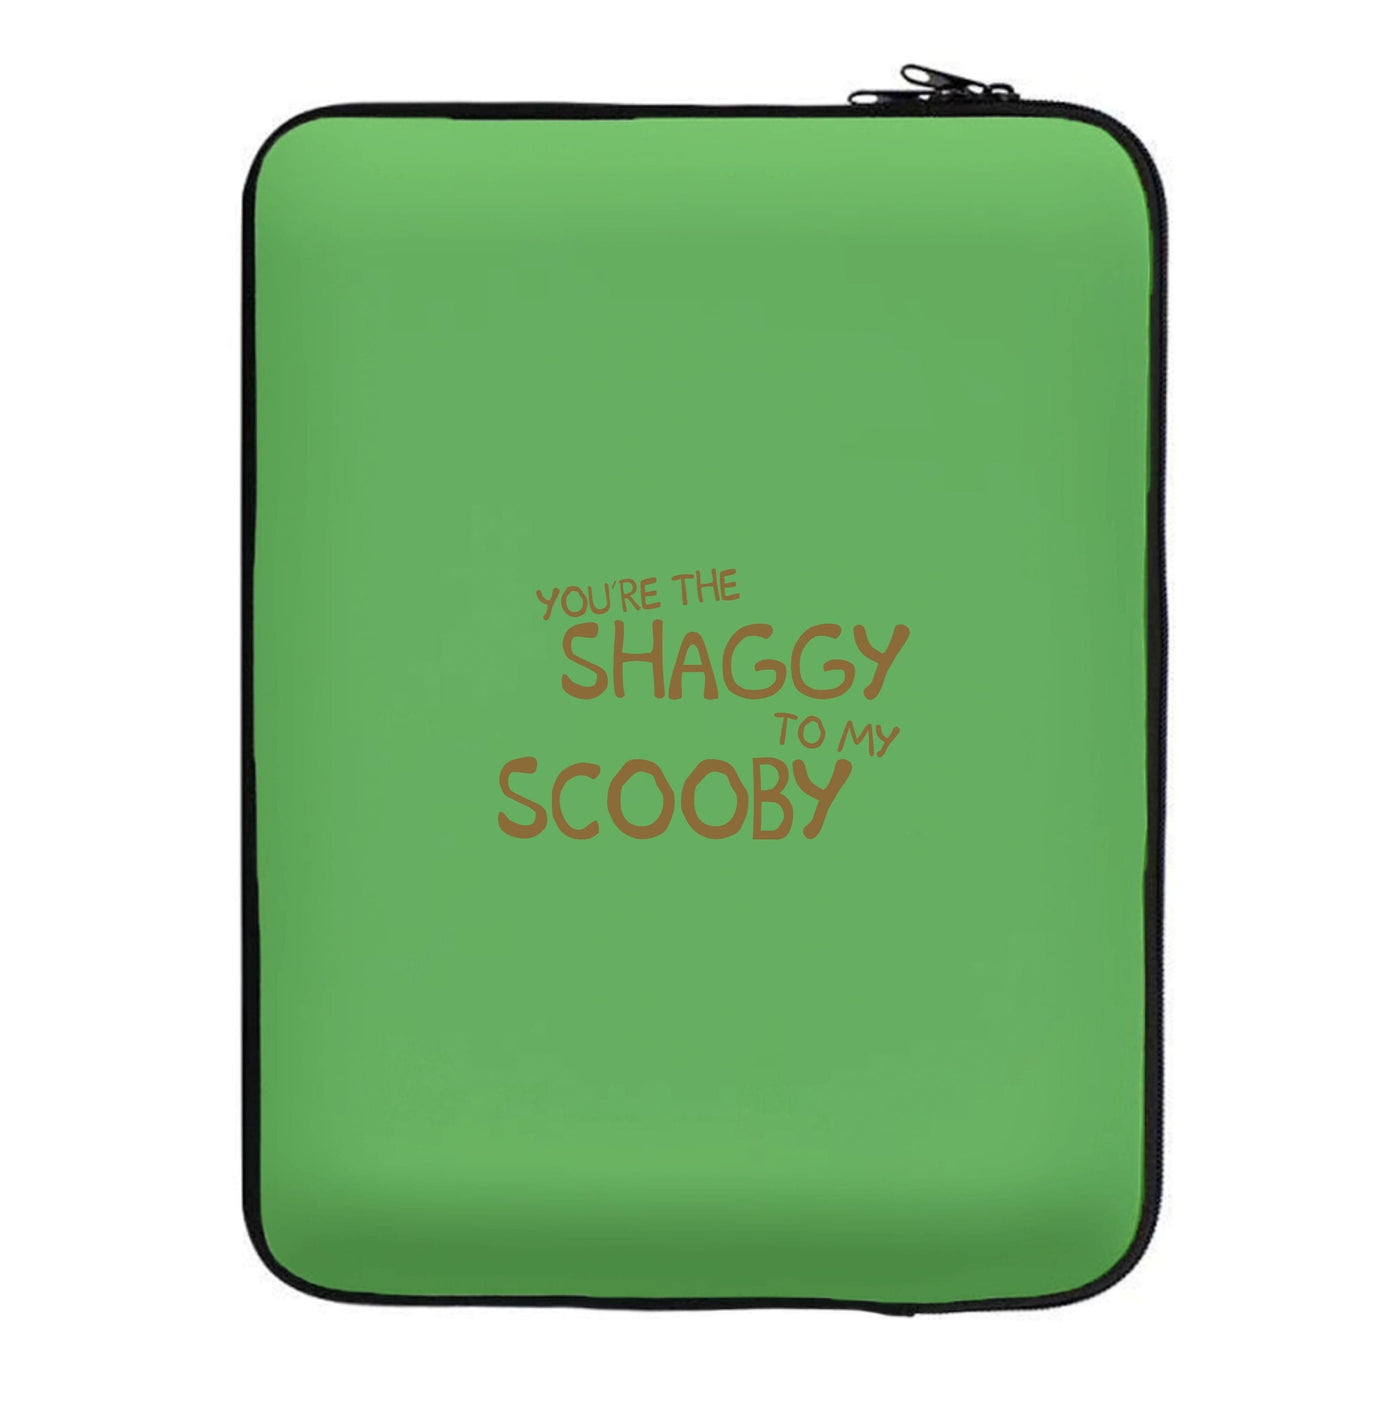 You're The Shaggy To My Scooby - Scooby Doo Laptop Sleeve